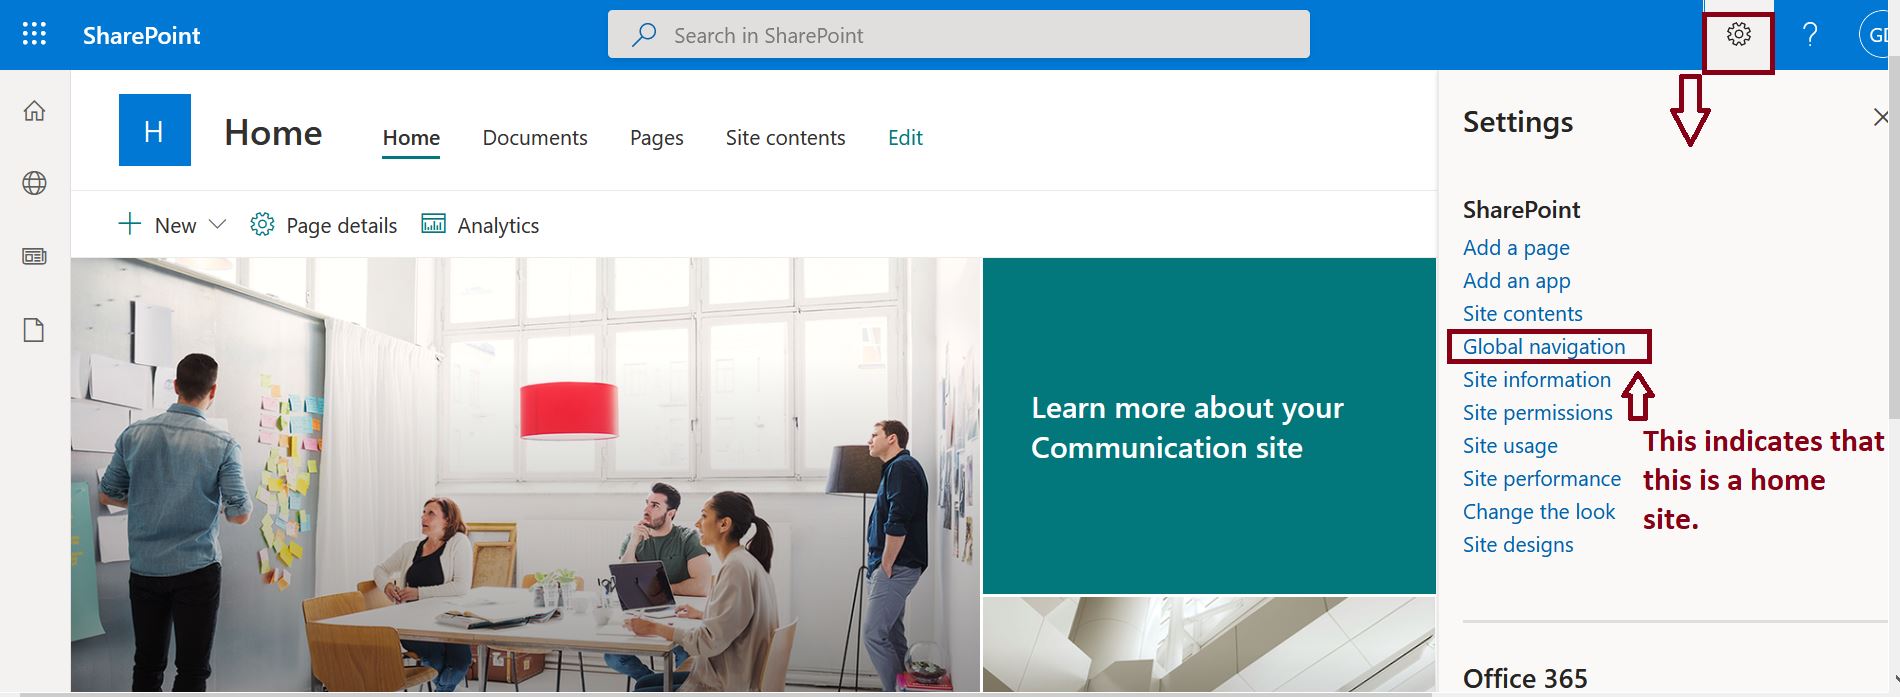 Setup home site SharePoint - Set up home site app for your organization in SharePoint Online